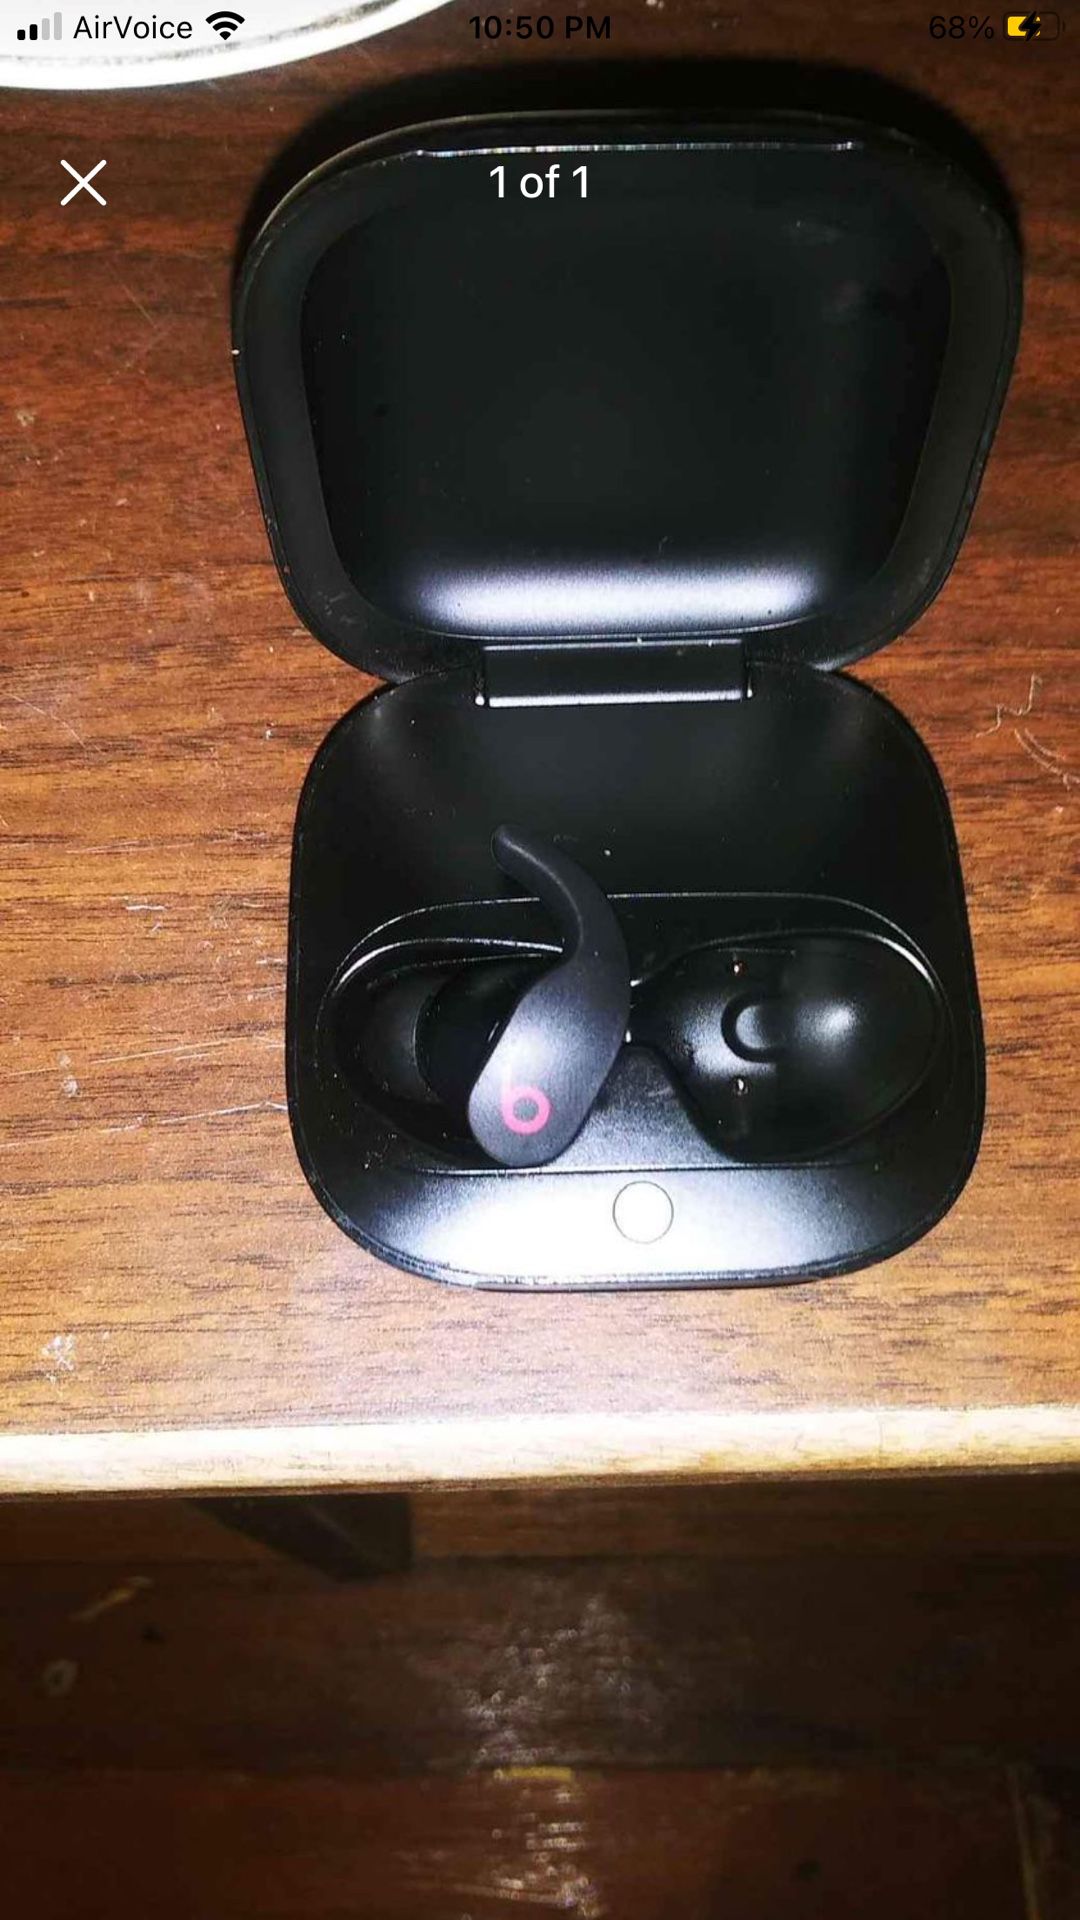 One Left Beats Earbud And Charging Case For Sale.